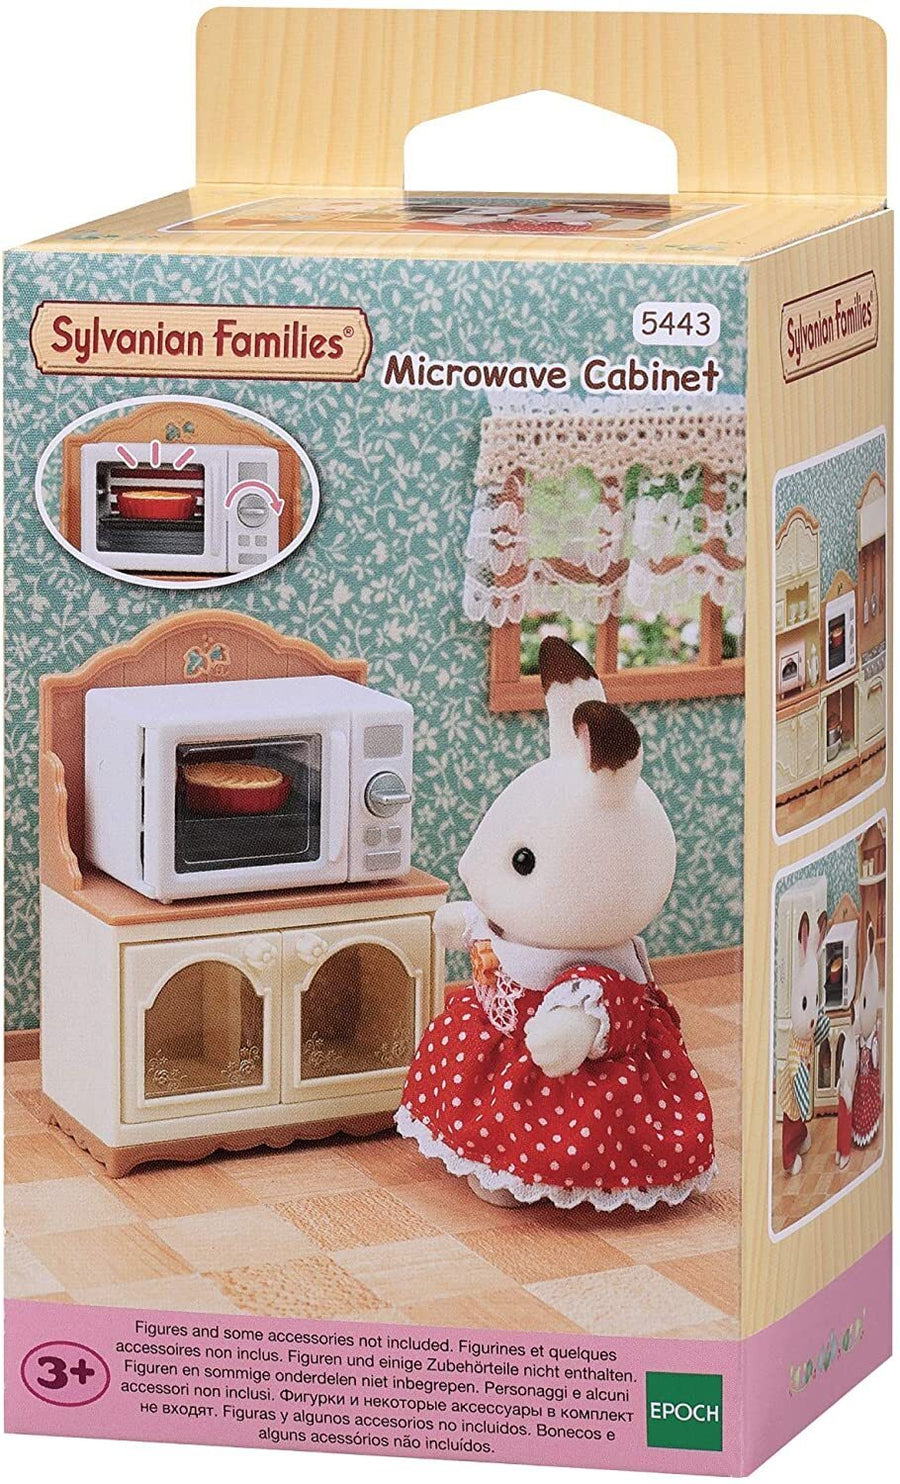 Sylvanian Families · Little Sprout - Read Play Learn